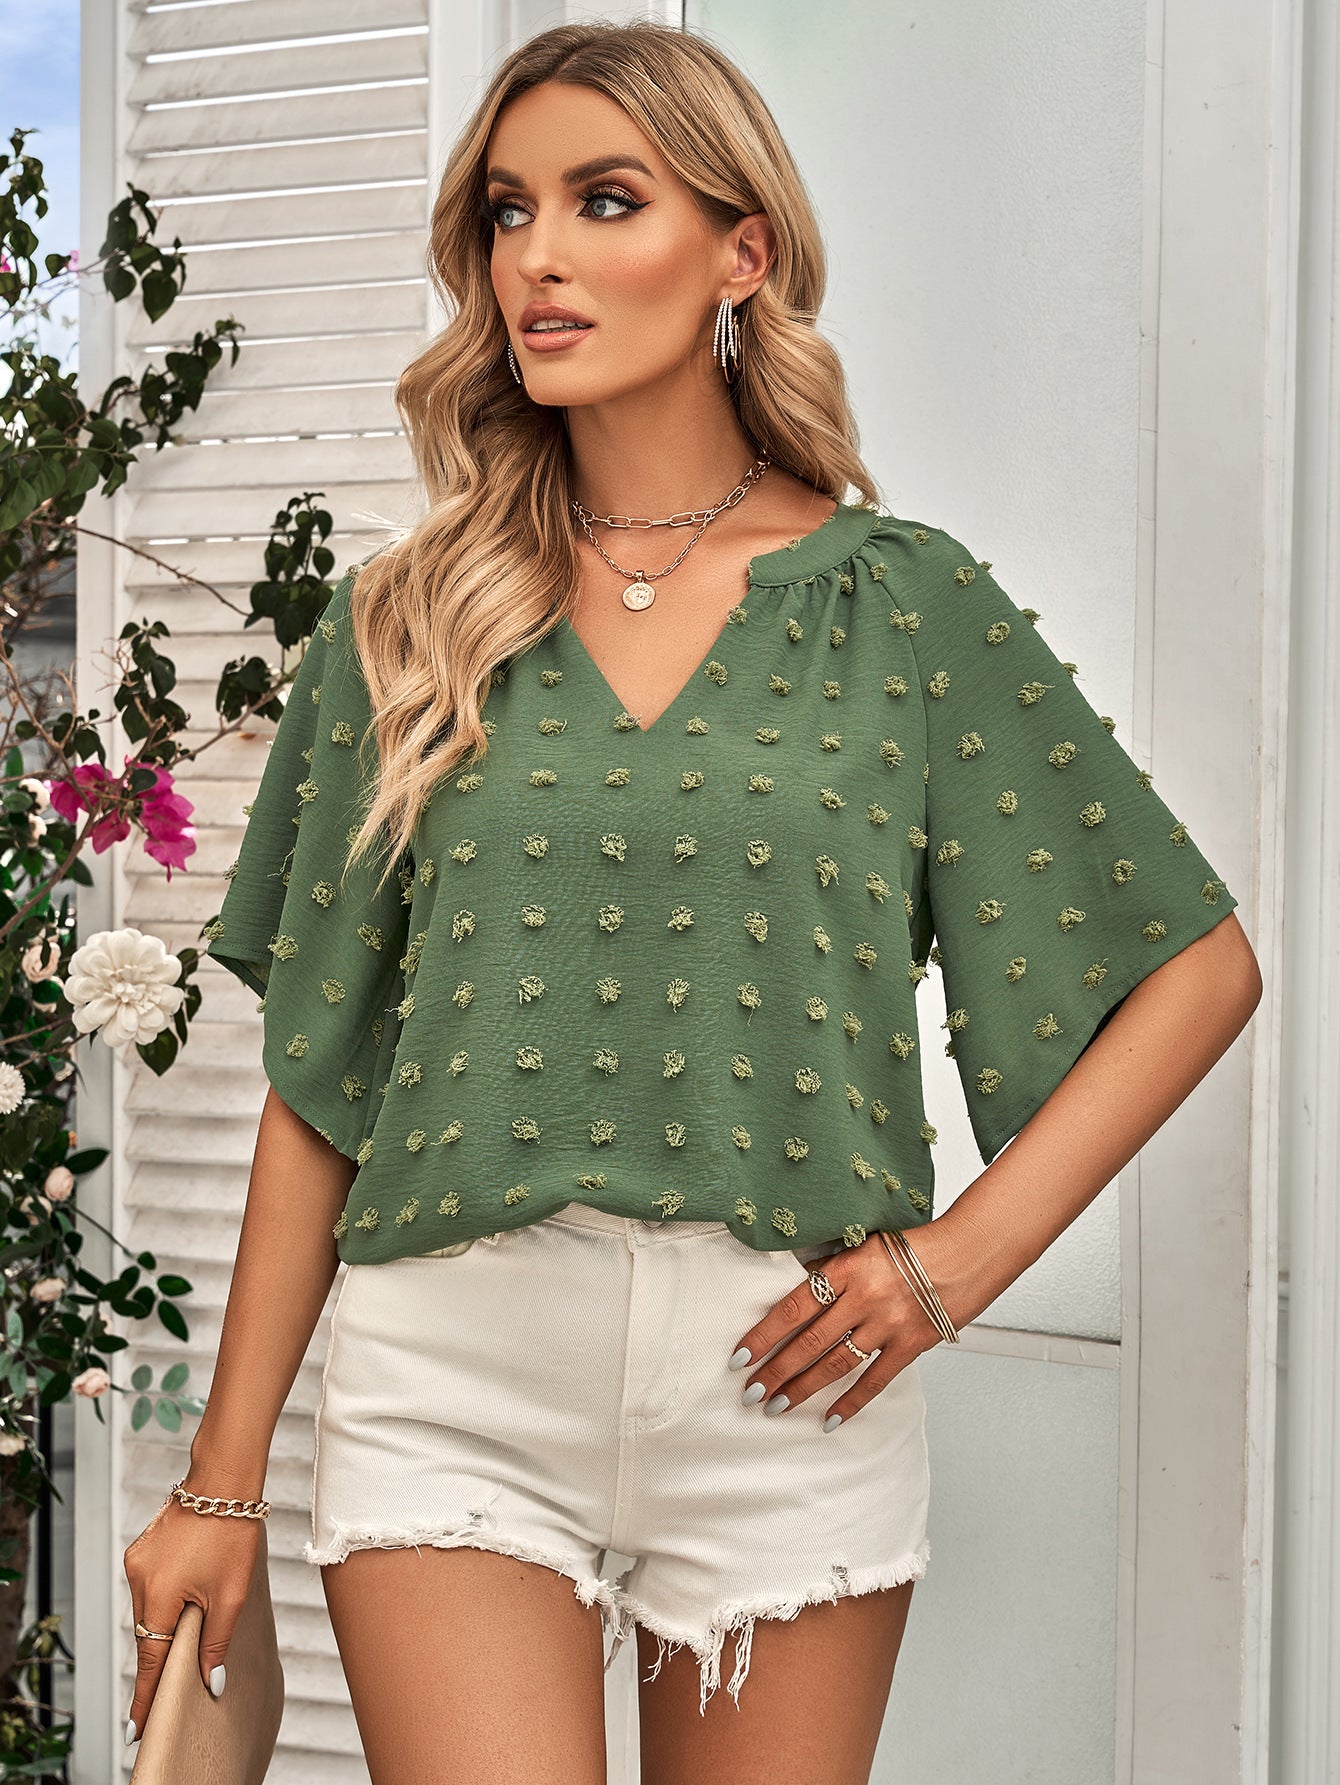 Swiss Dot Notched Neck Flare Sleeve Blouse (3 Colors)  Krazy Heart Designs Boutique Army Green S 